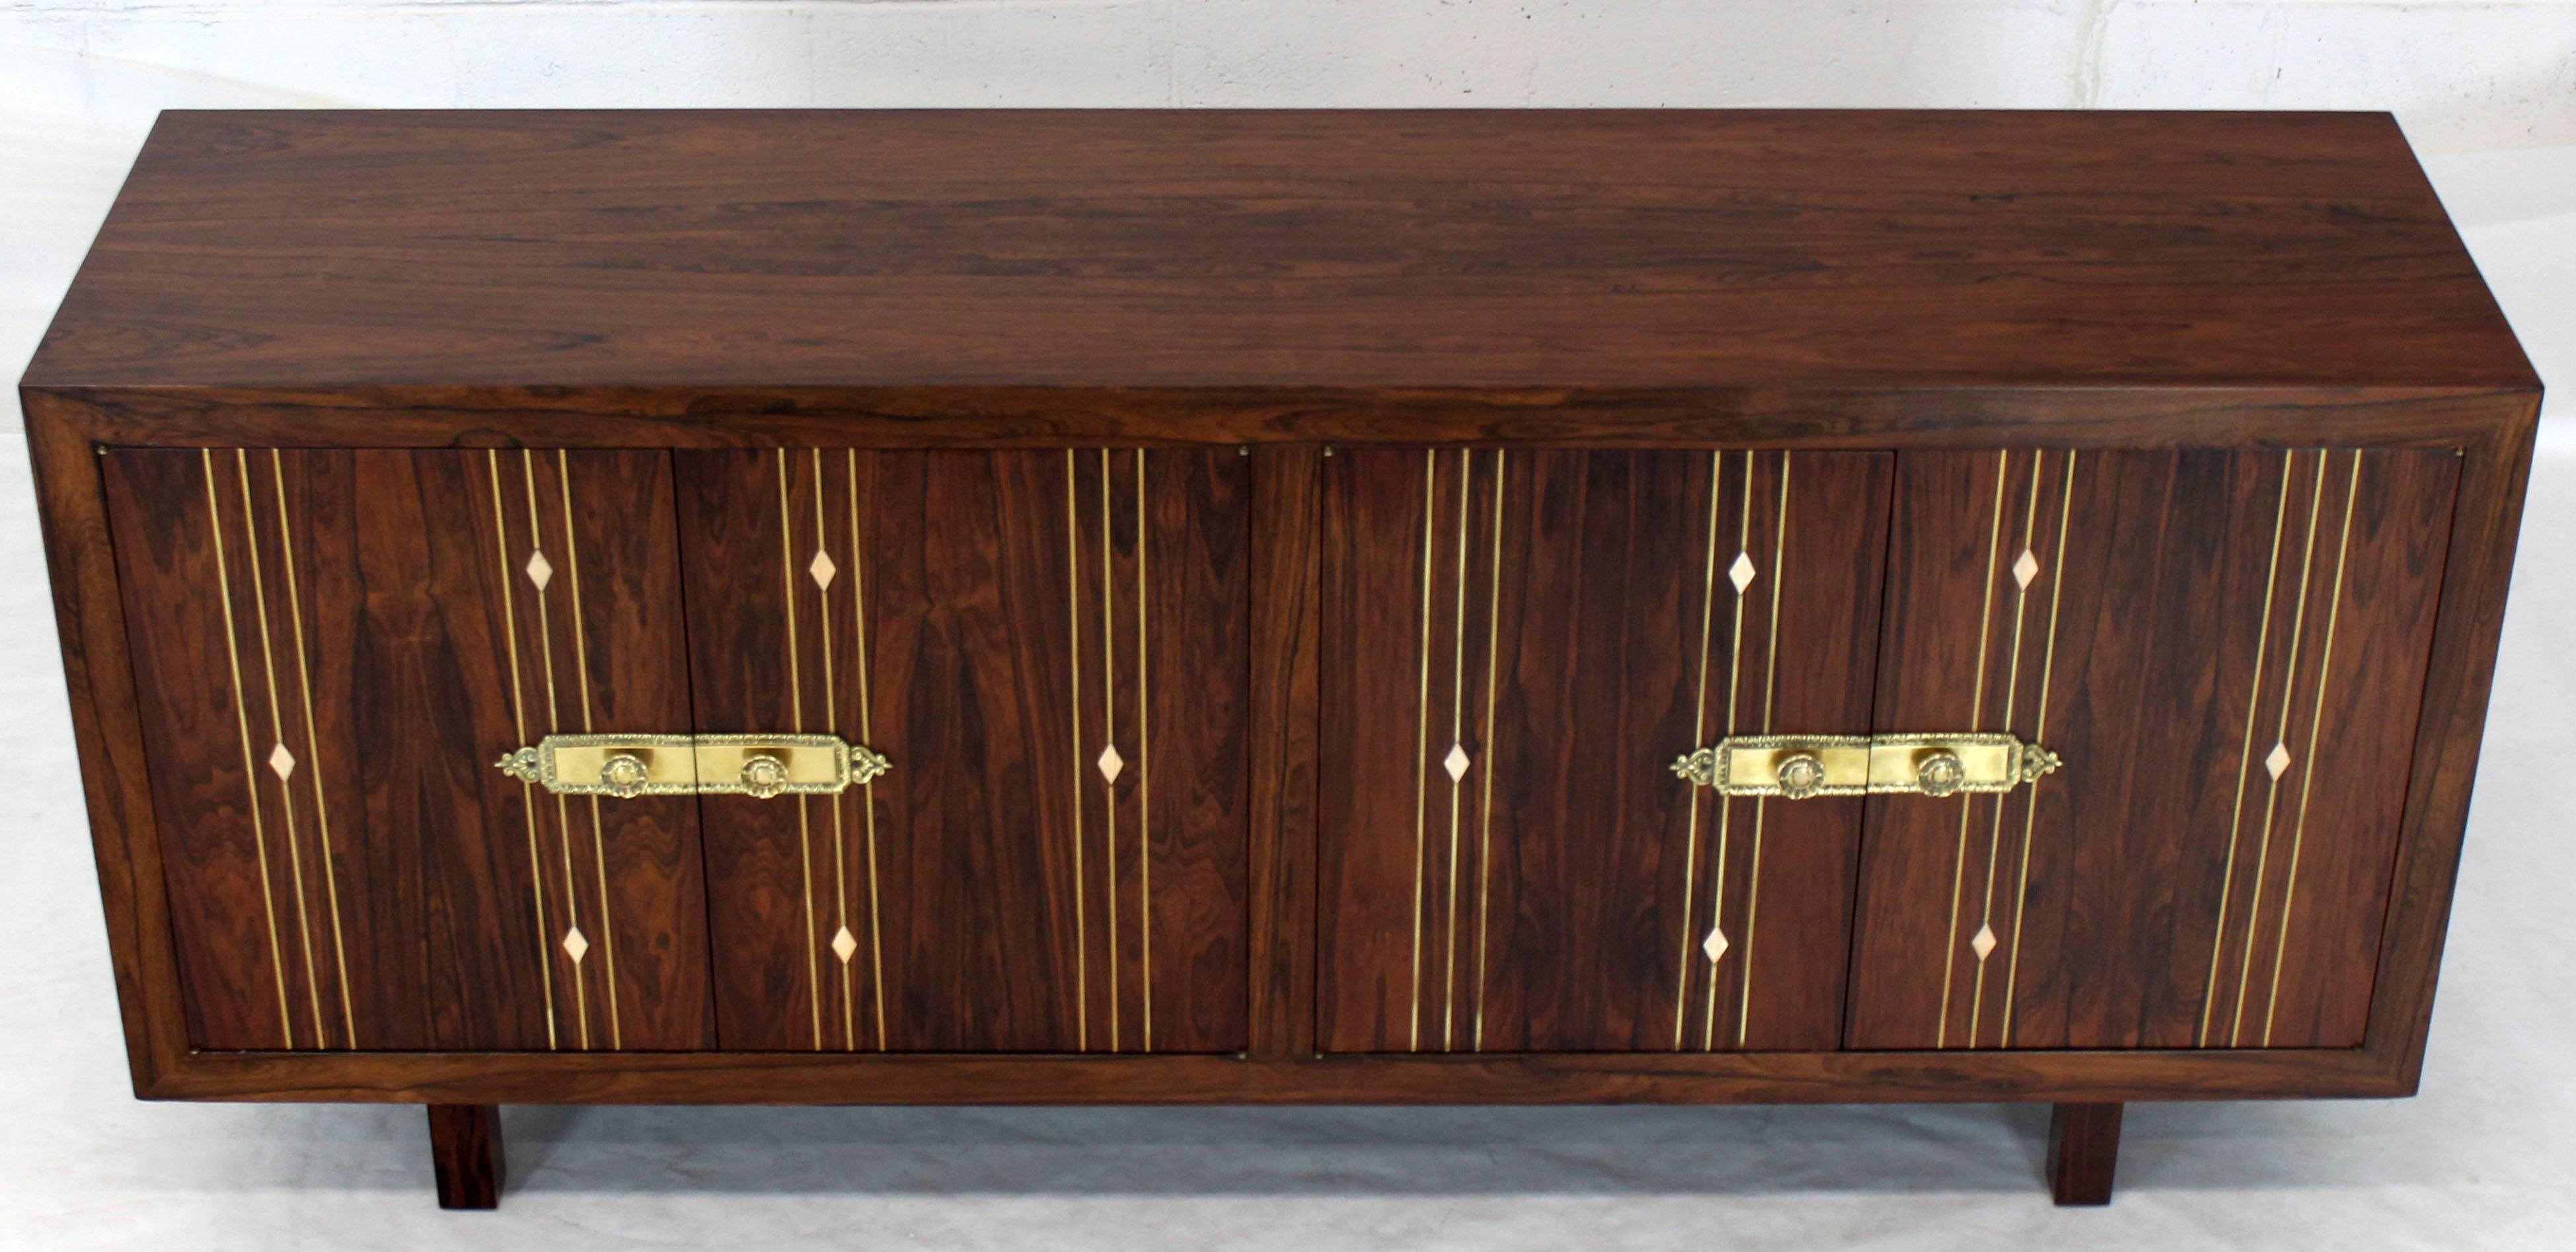 Midcentury Danish modern rosewood long credenza server with two drawers brass hardware and decorative inlay.